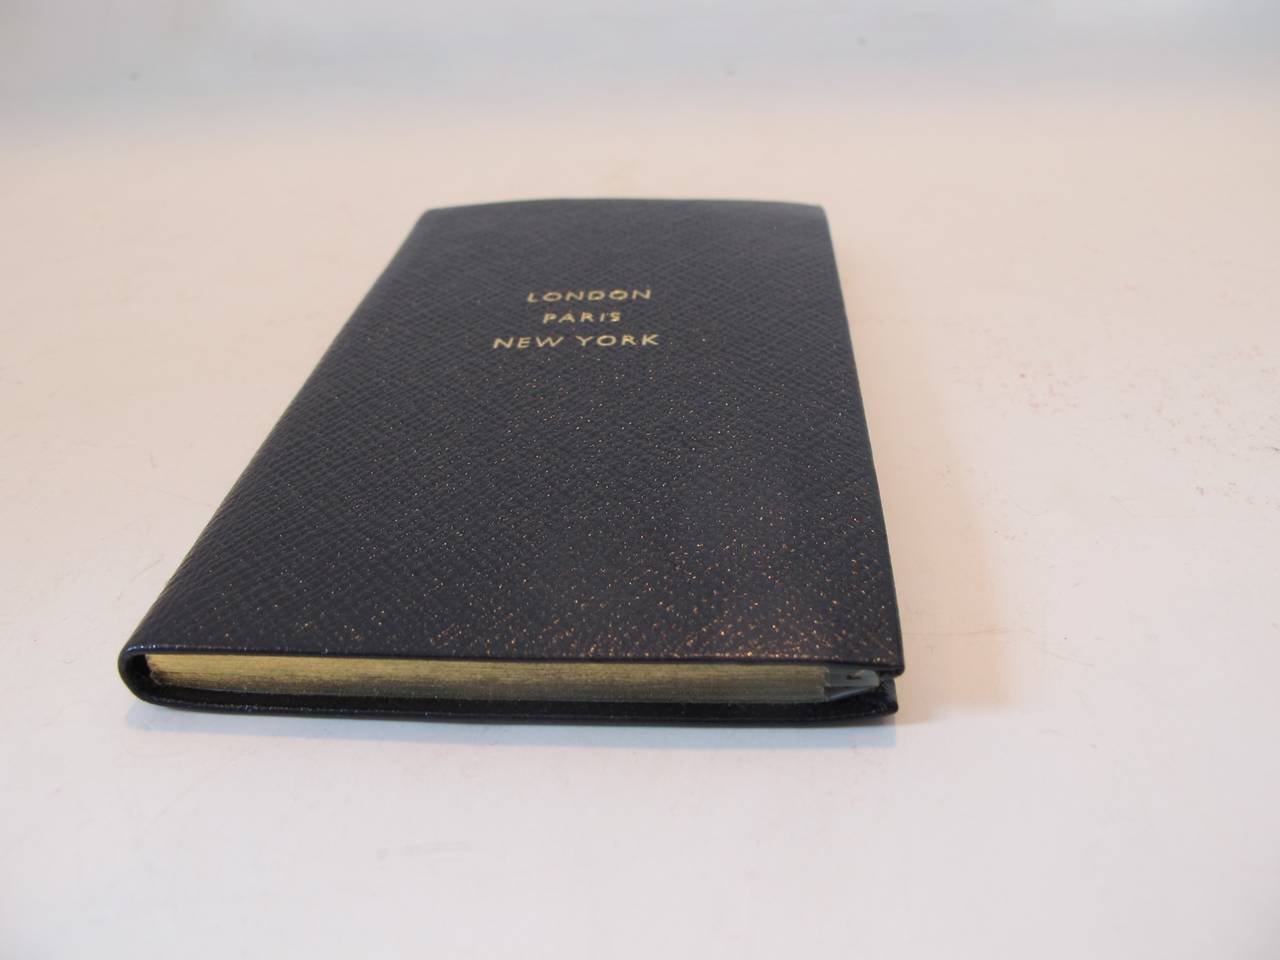 Smythson of Bond Street is the stationer to her majesty, The Queen. The address book is elegant, chic and a great spiritual gift to feel the exquisite leather.